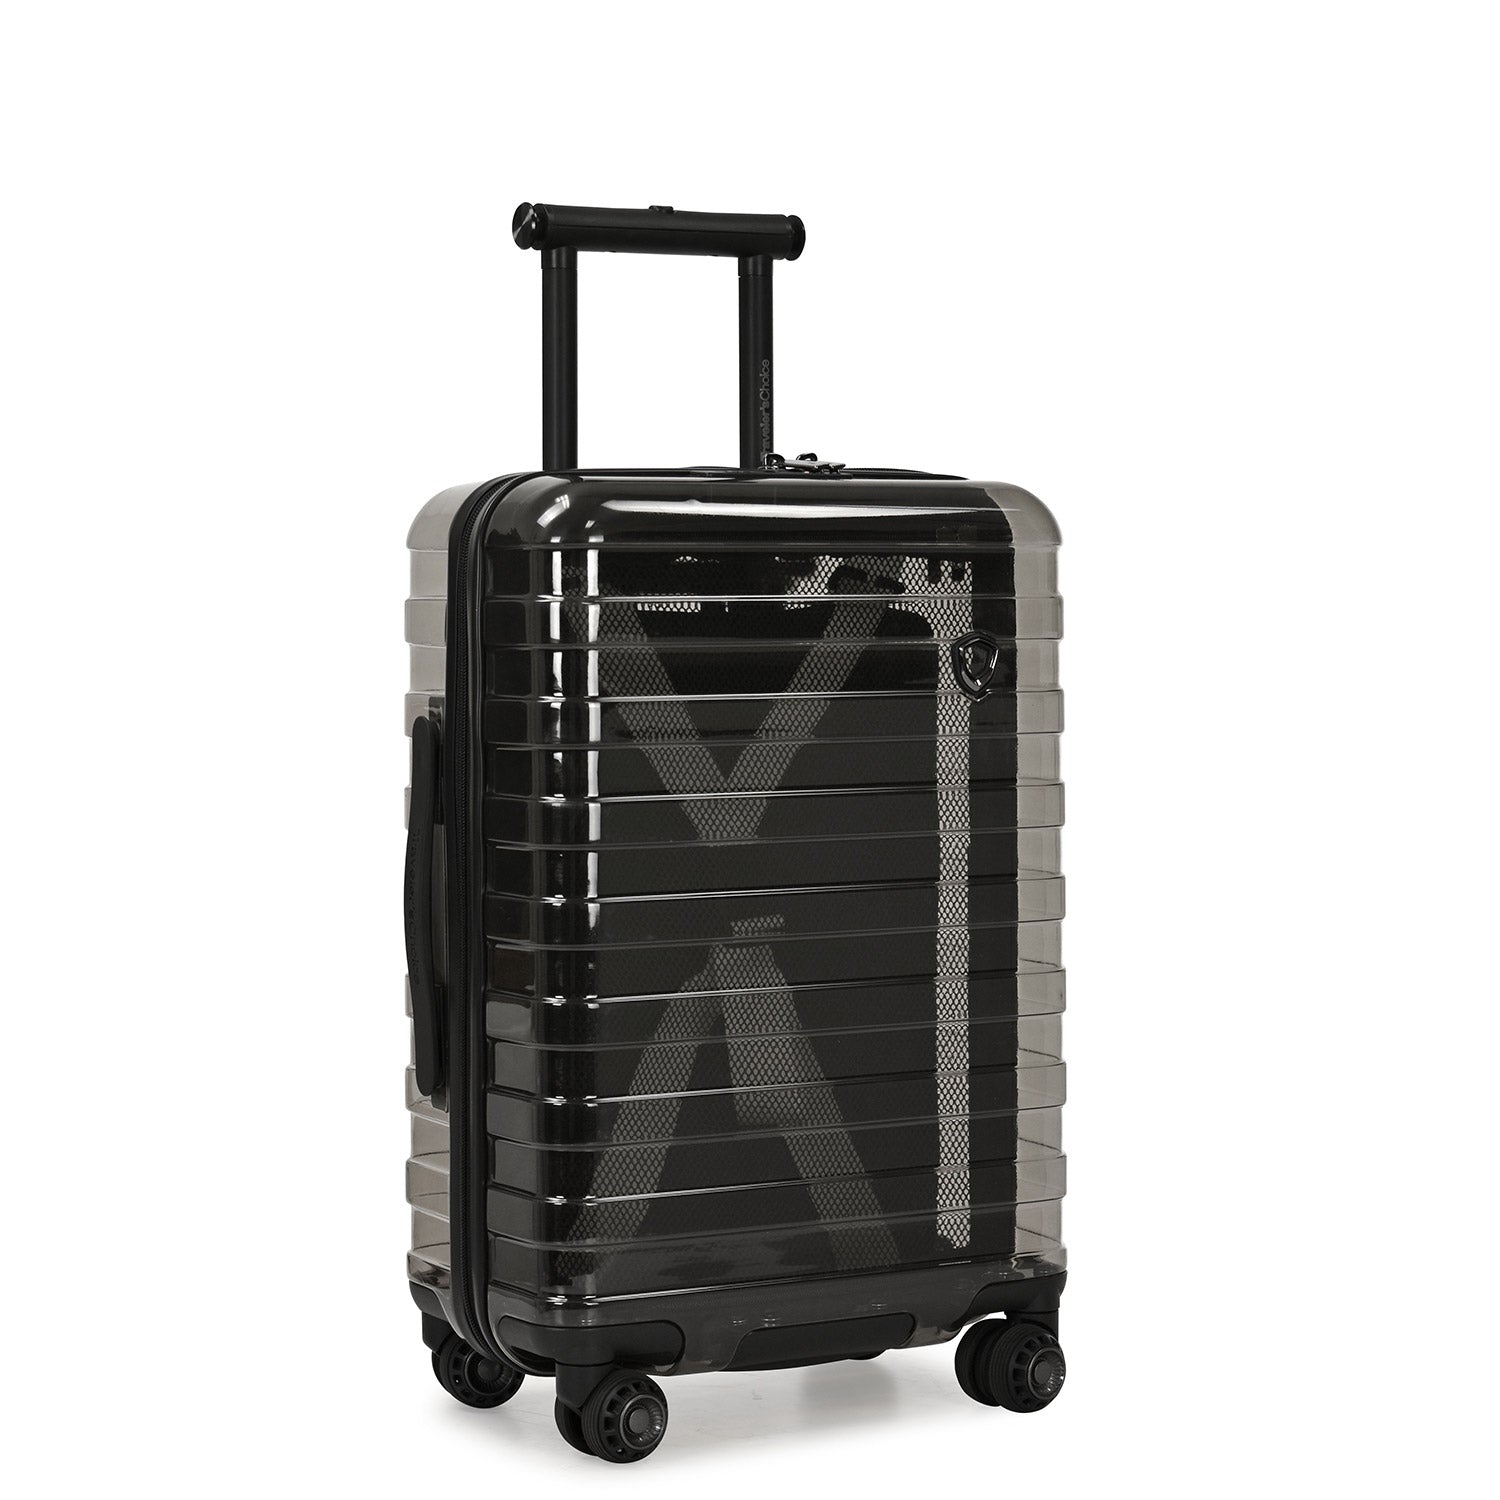 The Millennial II Transparent Carry-On